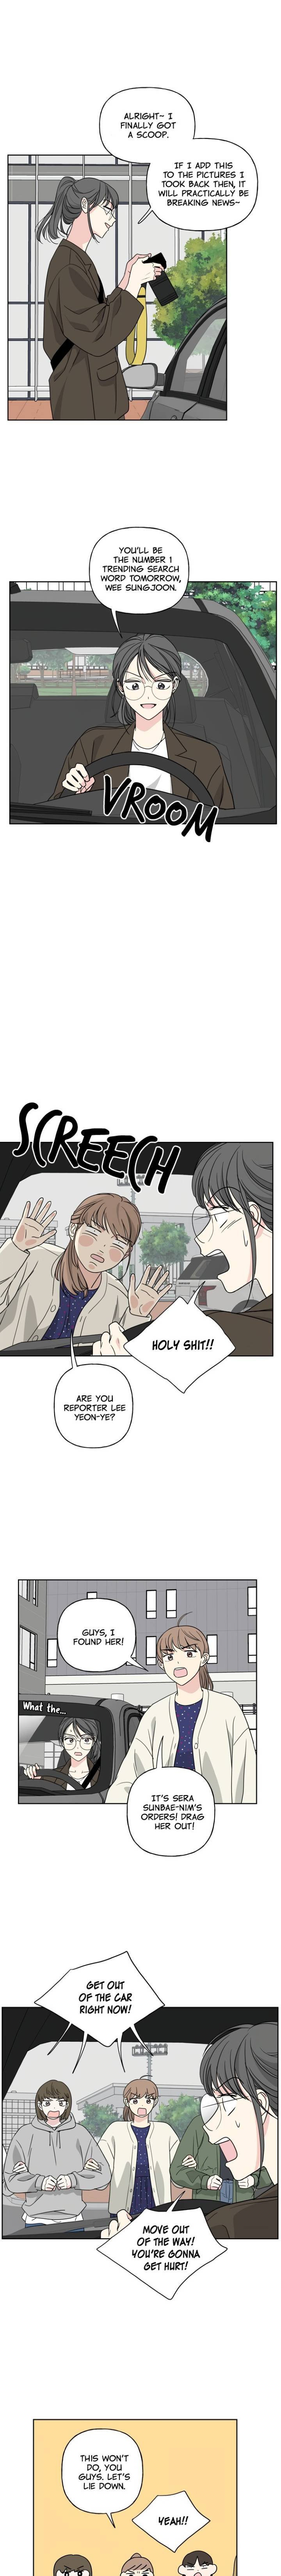 mother-im-sorry-chap-30-8